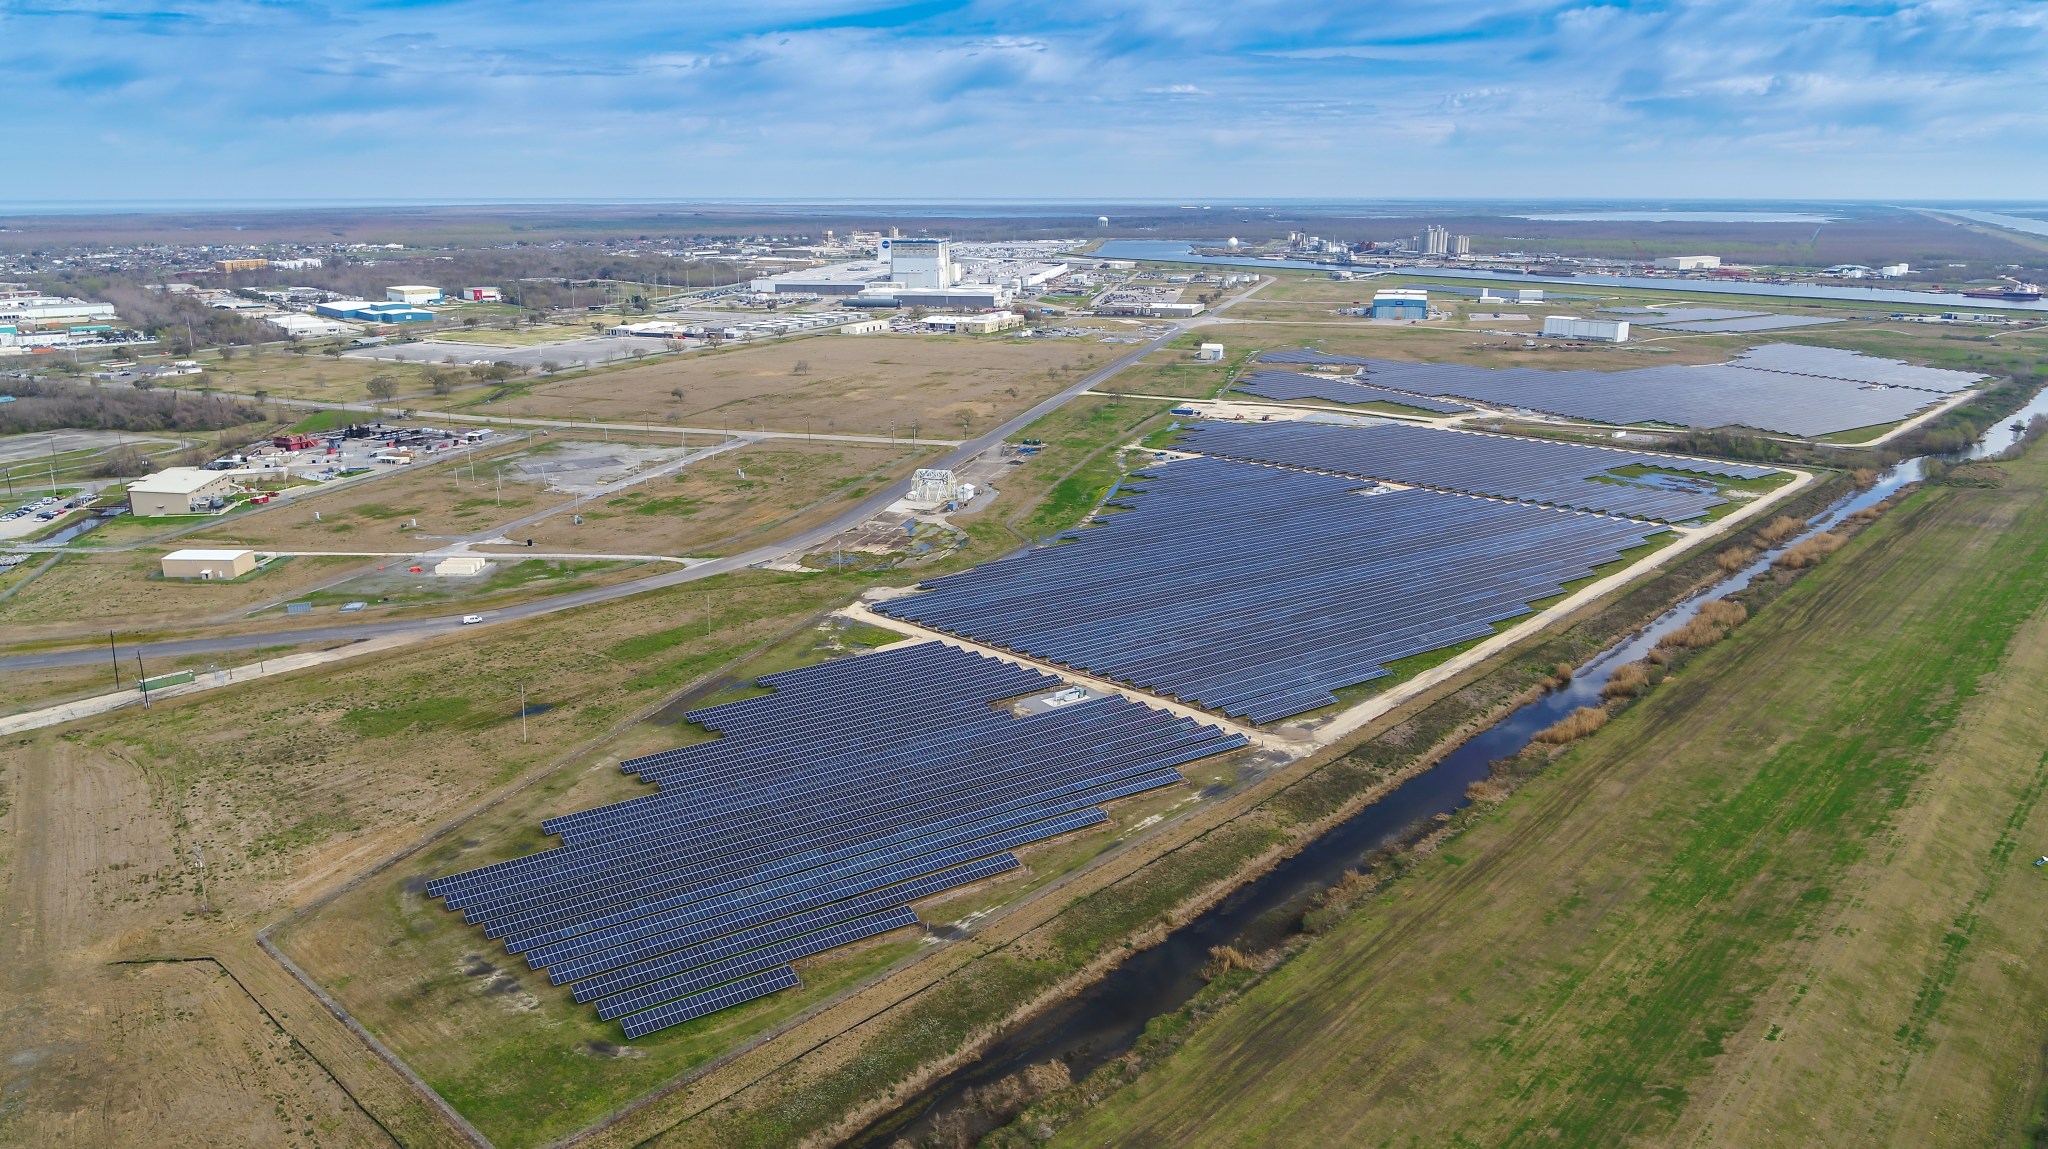 Entergy New Orleans’ New Orleans Solar Station, built in December 2020, resides on approximately 100 acres at Michoud.